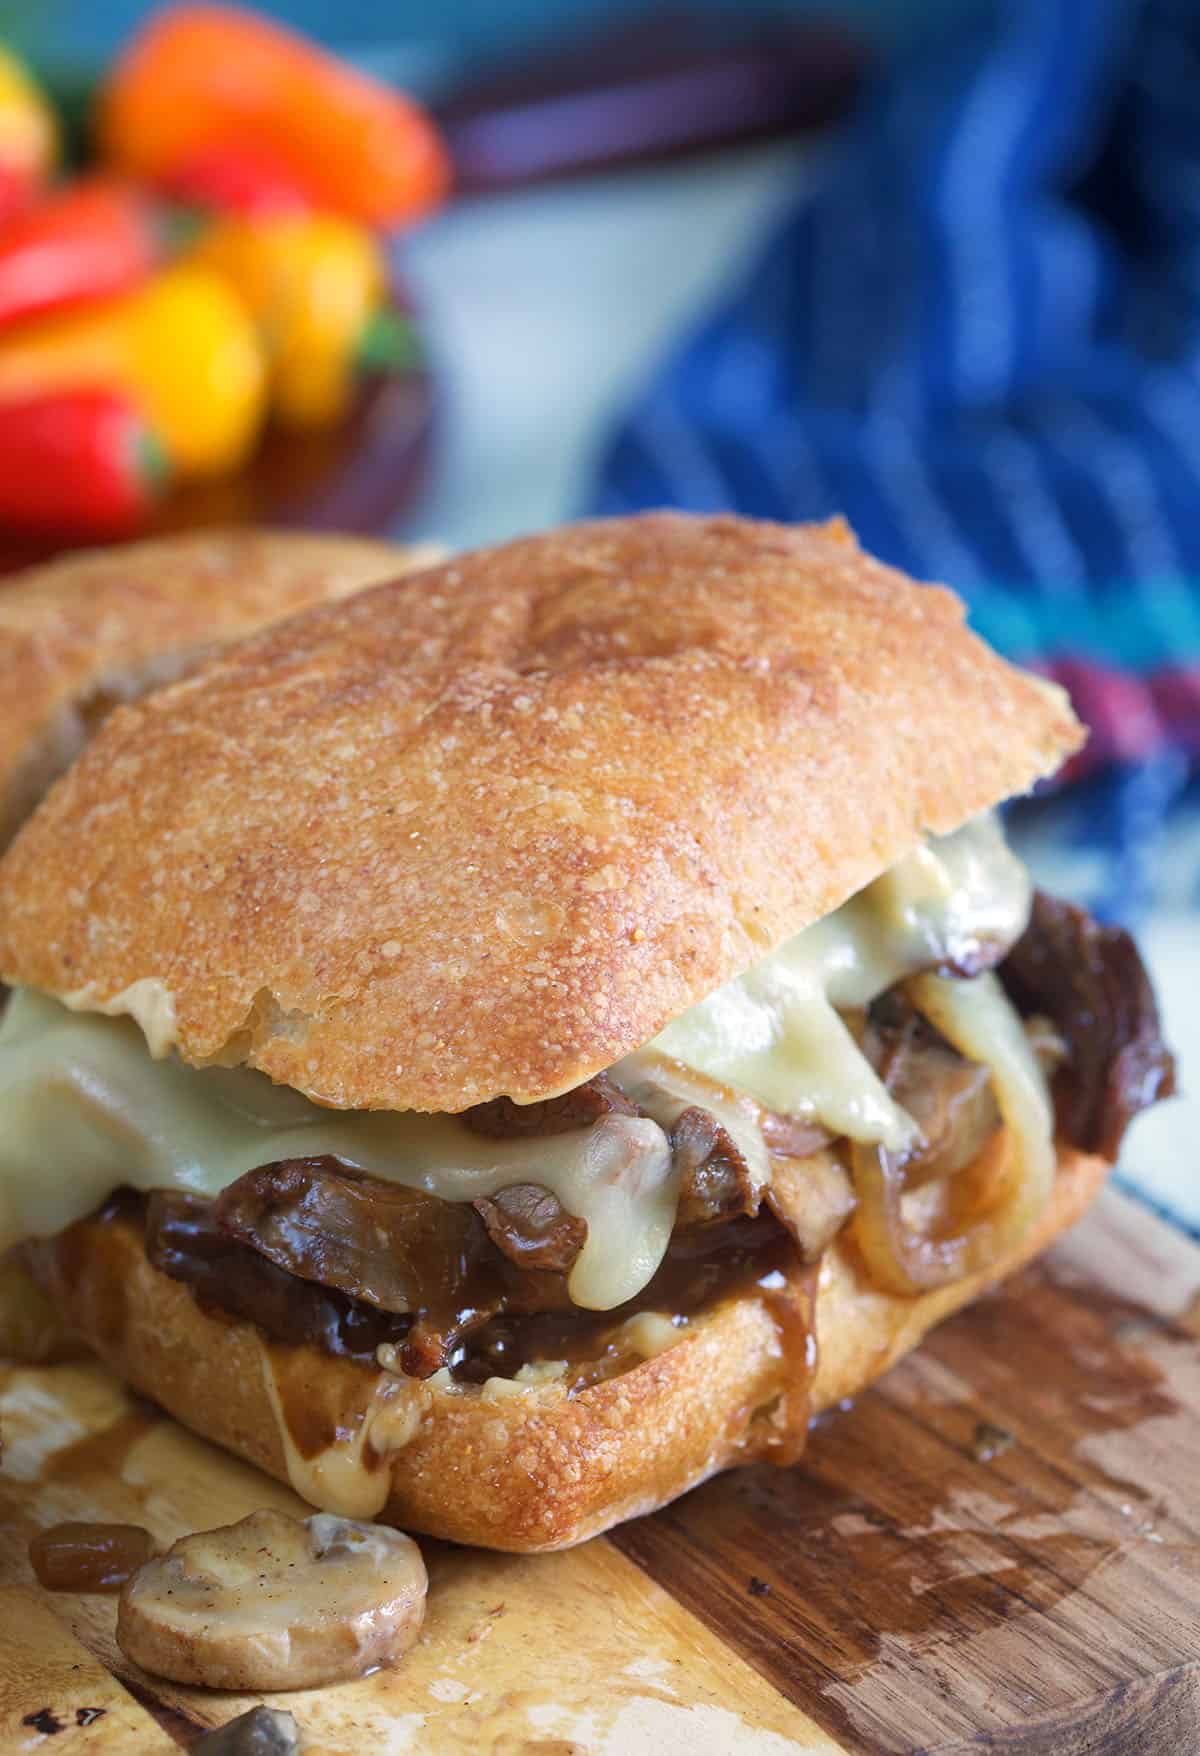 A cooked roast beef sandwich with cheese is placed on a wooden cutting board.